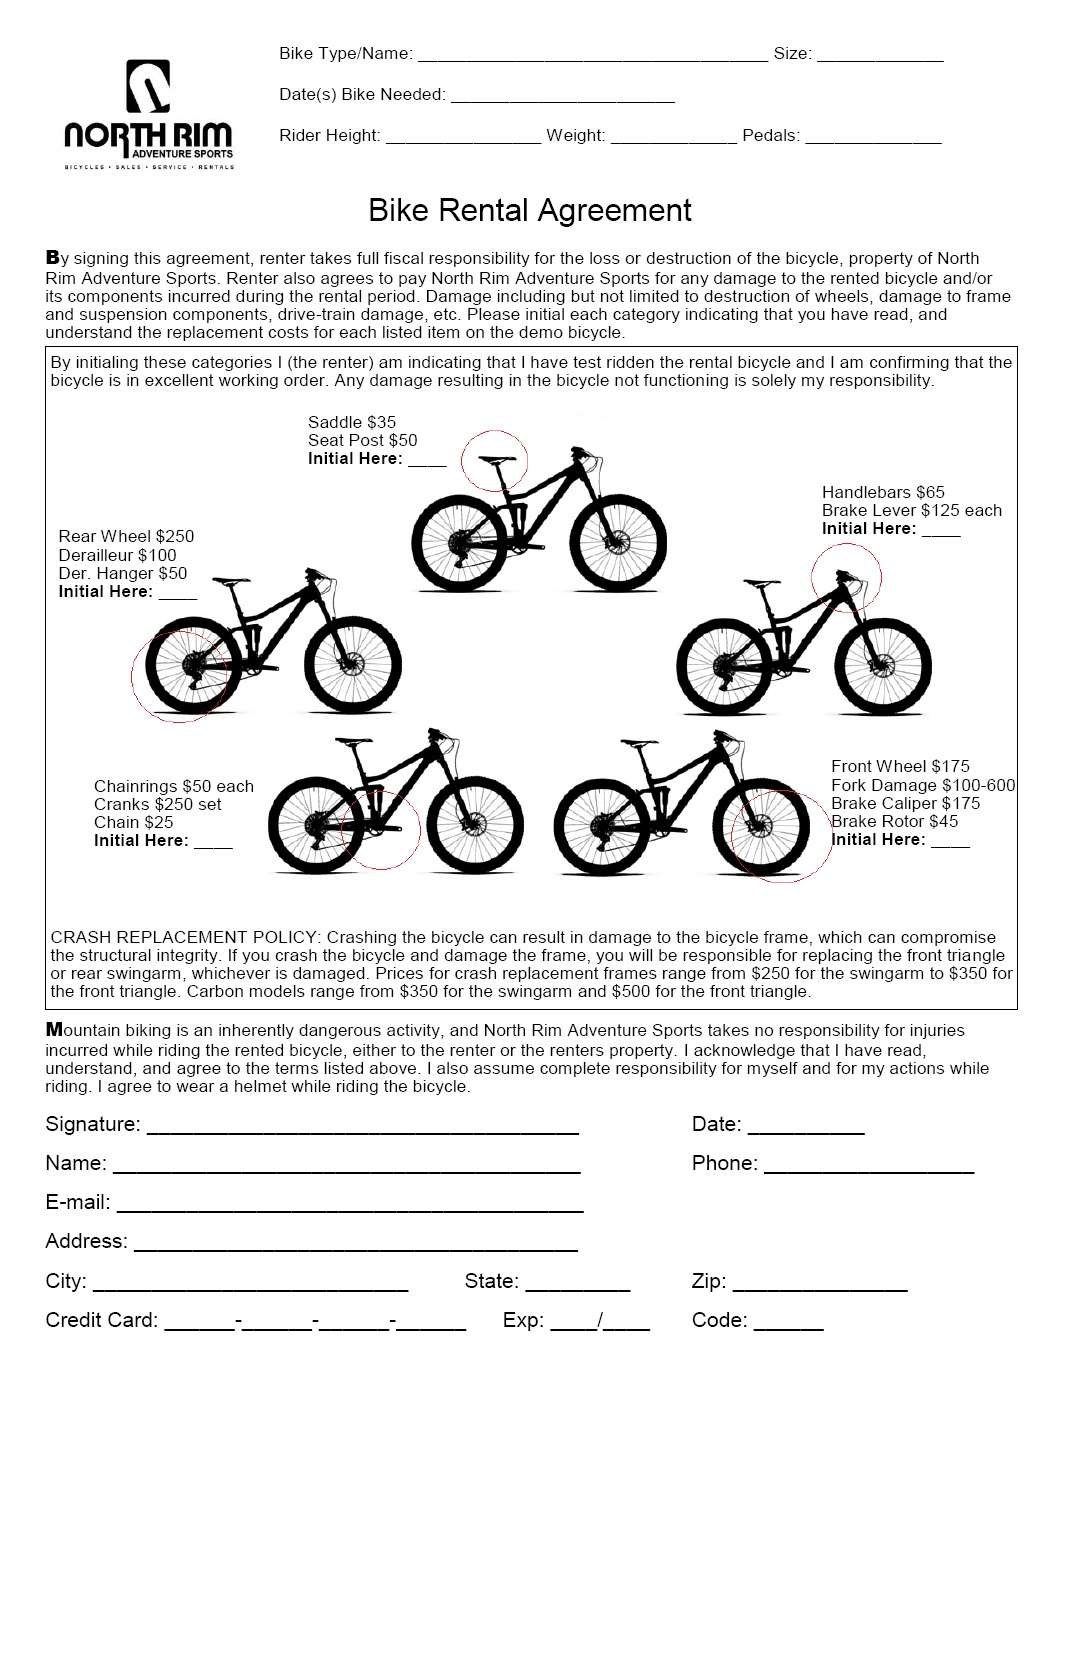 Rental Information  North Rim Adventure Sports Chico Ca with regard to Bicycle Rental Agreement Template